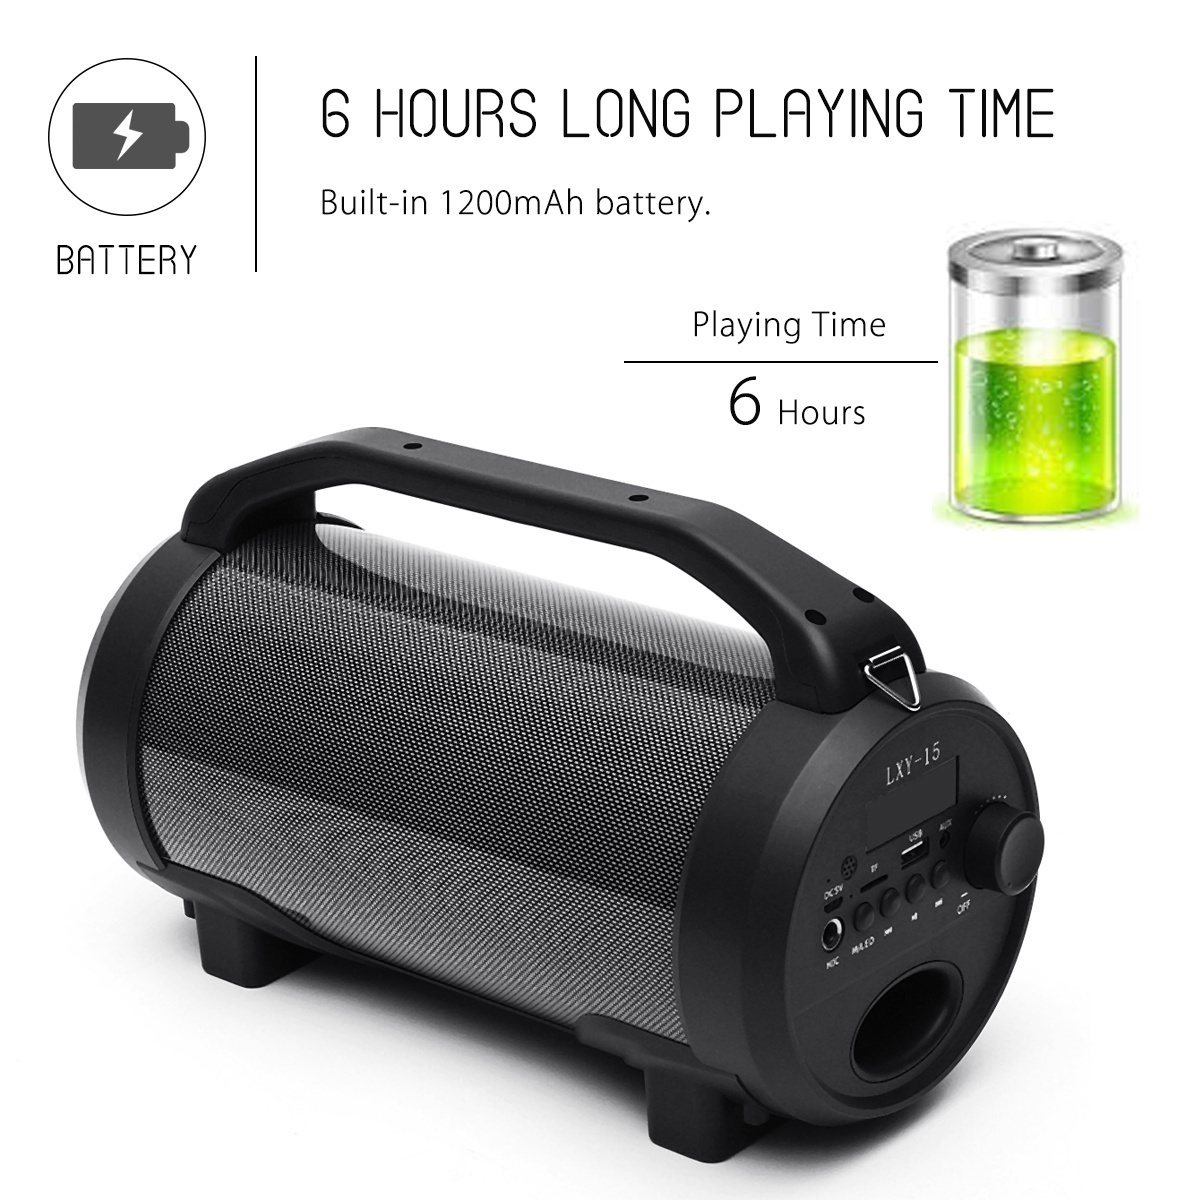 Bakeey-Portable-Wireless-bluetooth-Stereo-Speaker-With-TF-Card-Player-FM-Radio-For-Tablet-Smartphone-1637582-4